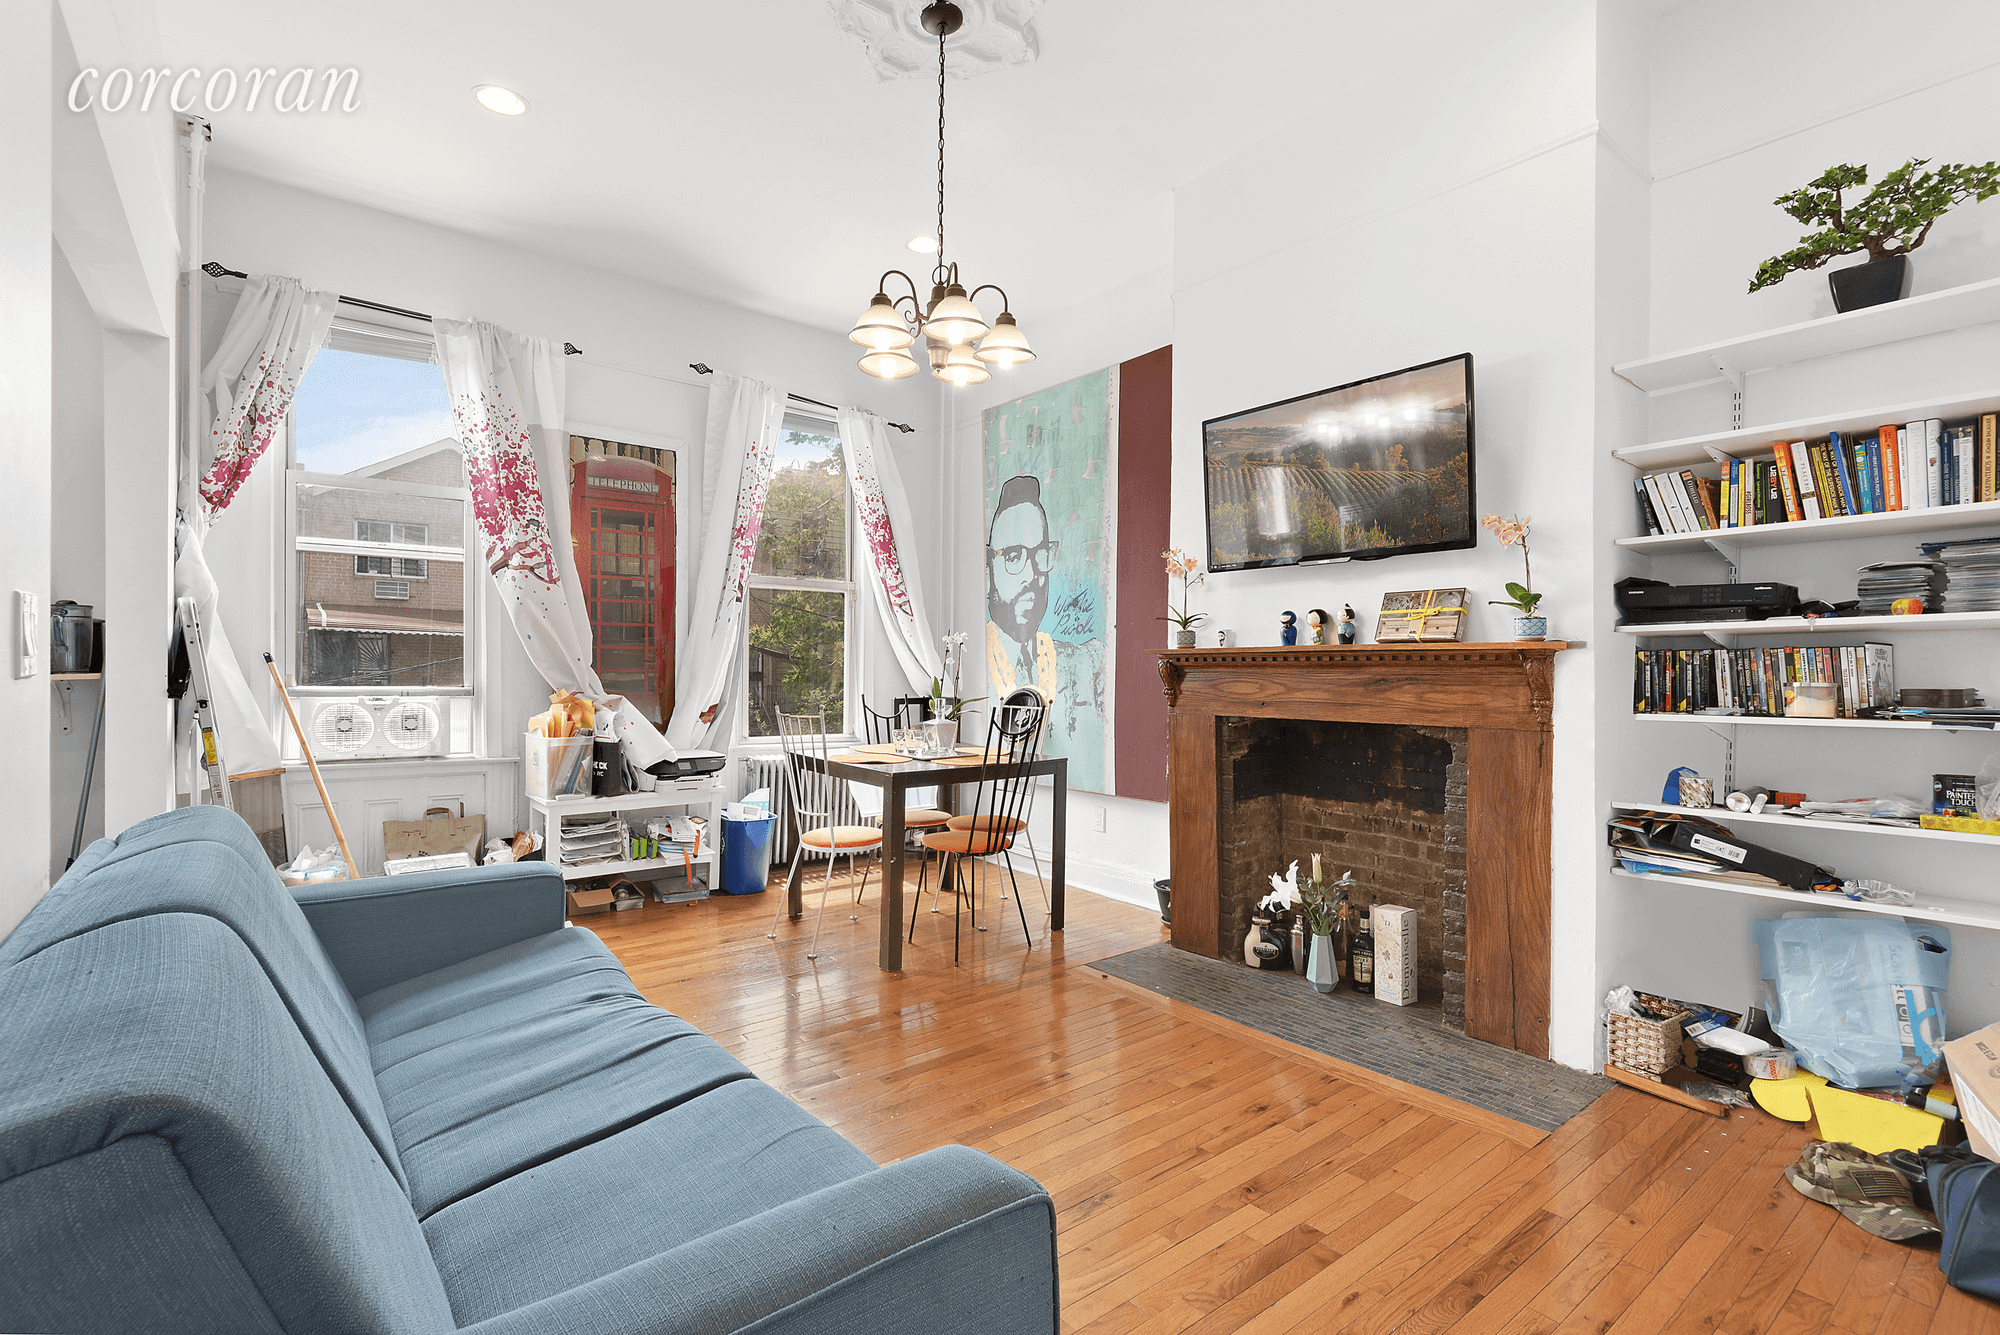 Motivated seller ! 26 Weirfield Street is a well maintained, move in condition Two Family home located on Weirfield Street between Broadway and Bushwick Avenue.